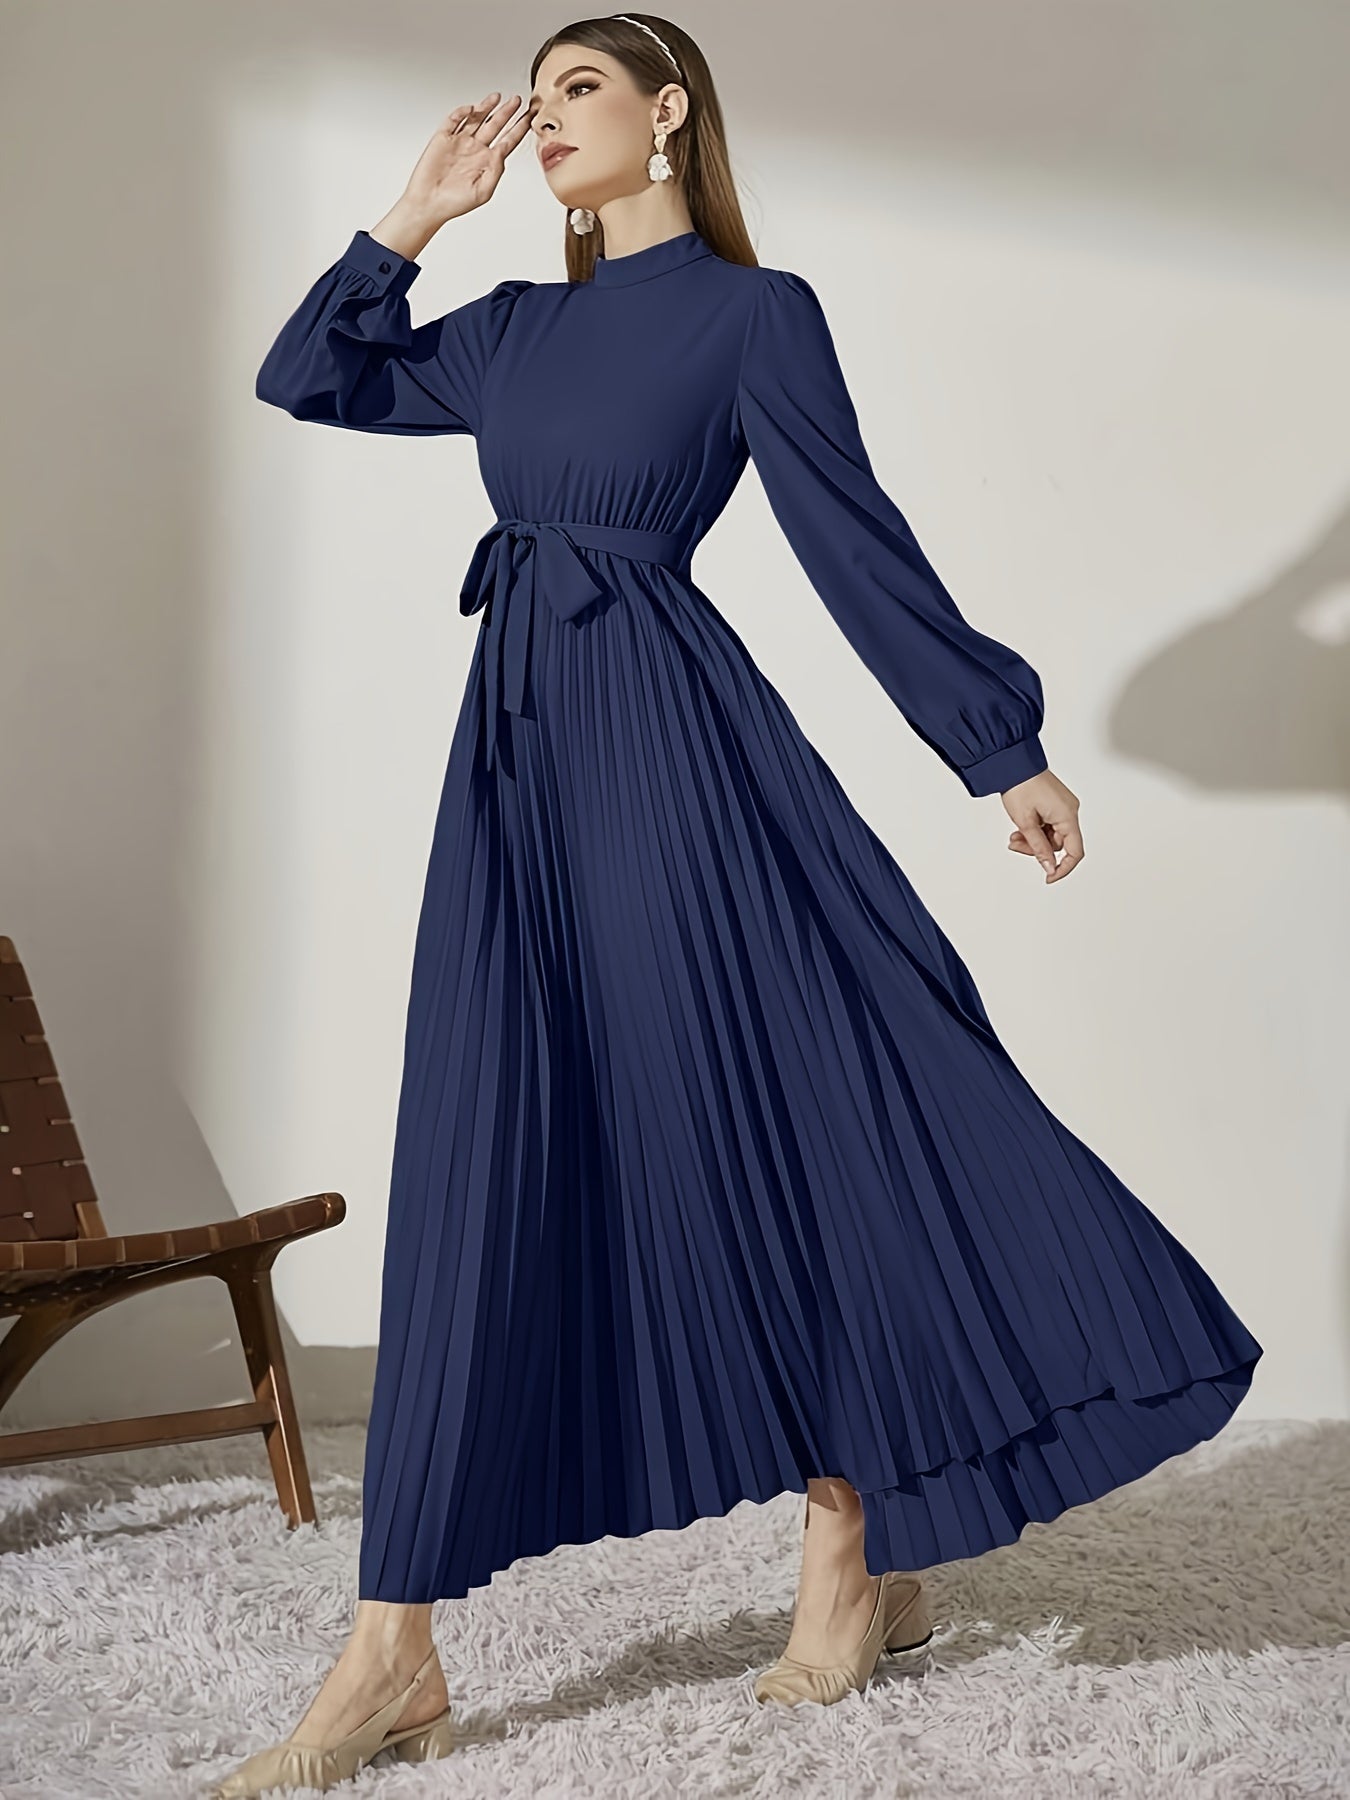 vlovelaw  Solid Color Tie-waist Pleated Dress, Casual Mock Neck Dress For Spring & Fall, Women's Clothing